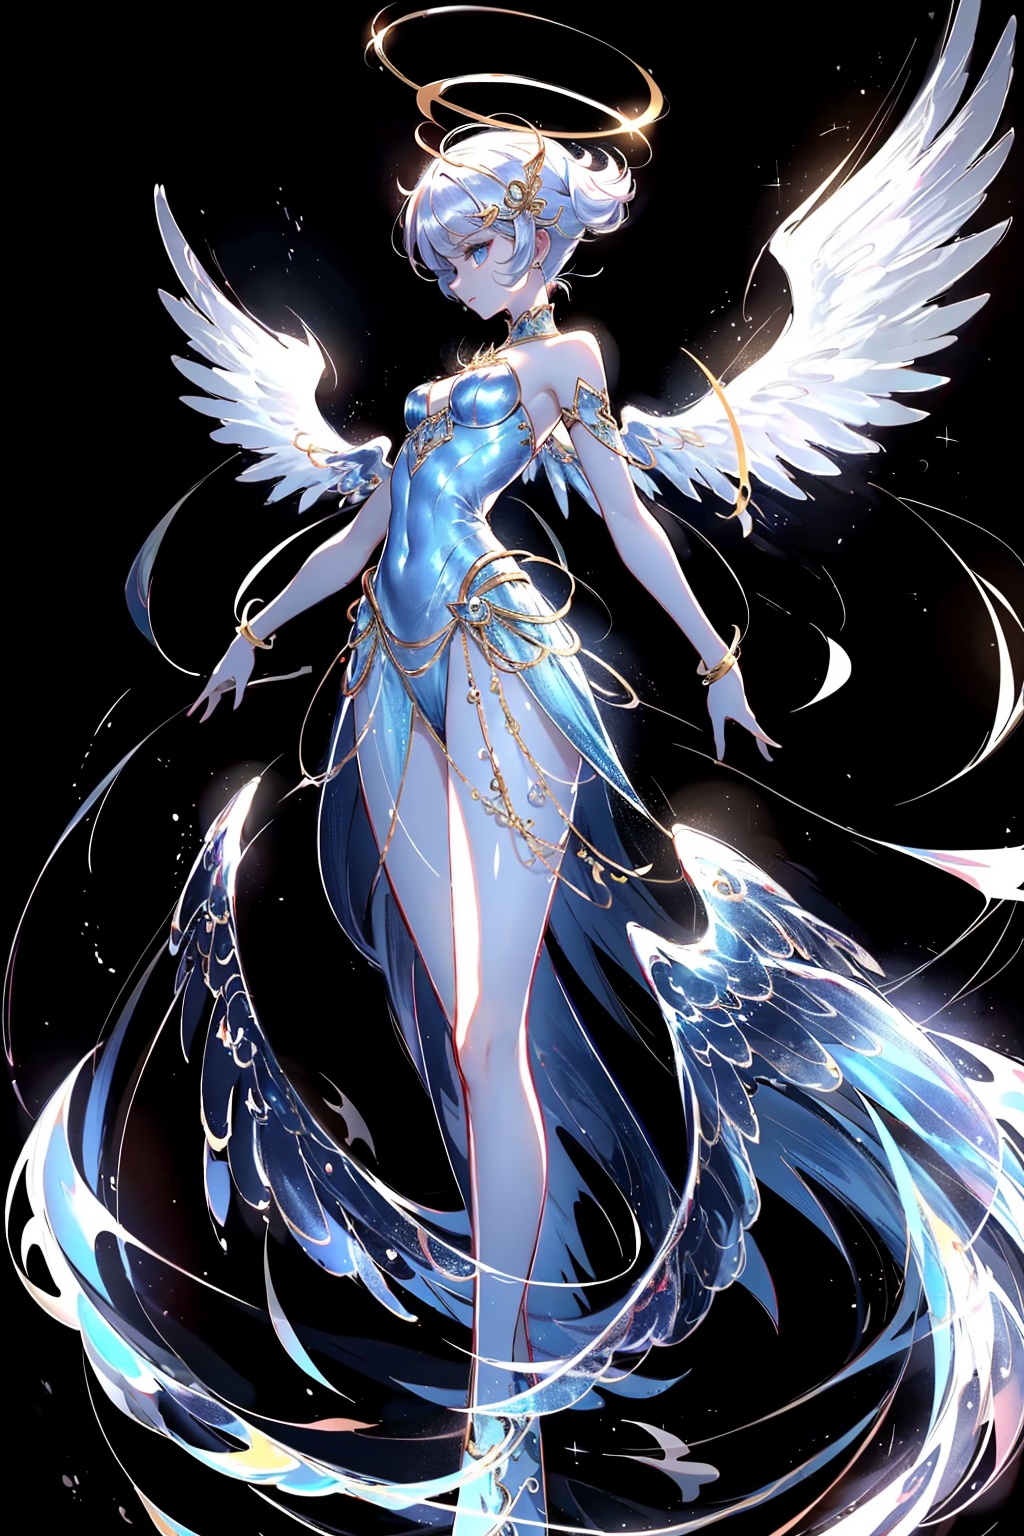  Best quality, 8k, cg, 
a close up of a person with a halo on a black background, glowing angelic being, ethereal angelic being of light, wings made of light, ethereal wings, angelic light, tron angel, angel spirit guide, angelical, ethereal anime, of beautiful angel, astral fairy, big white glowing wings, infinite angelic wings, goddess of light, beautiful angel, epic angel wings